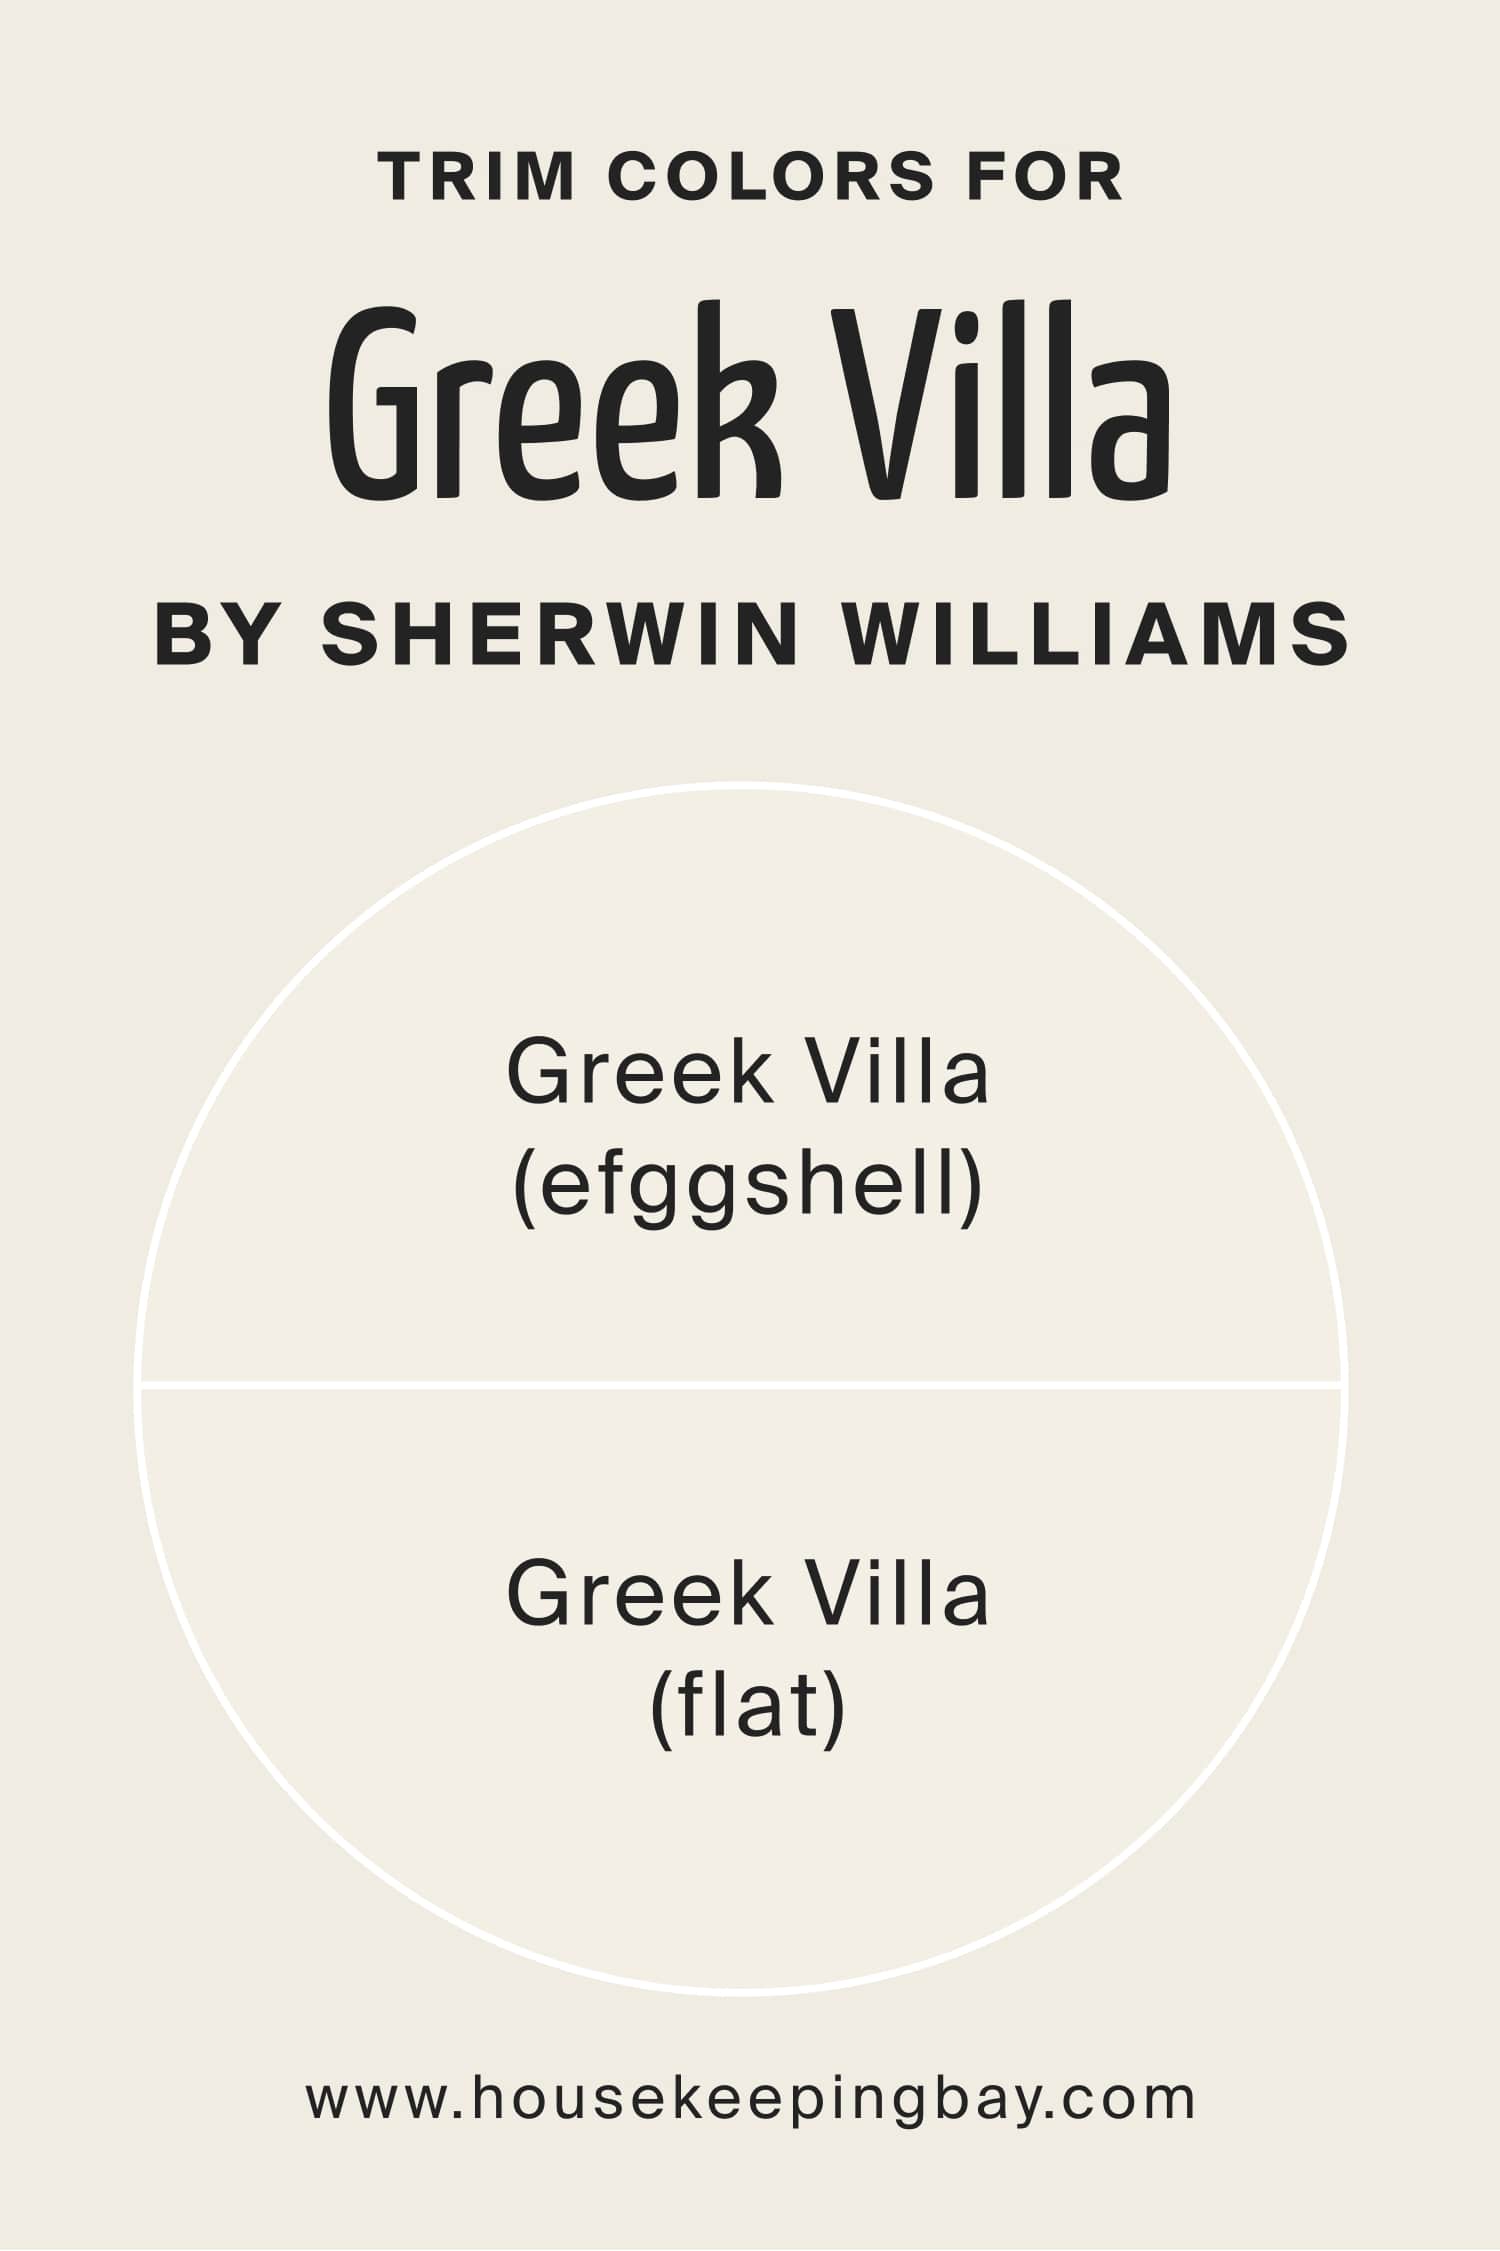 Trim Colors for Greek Villа by Sherwin Williams